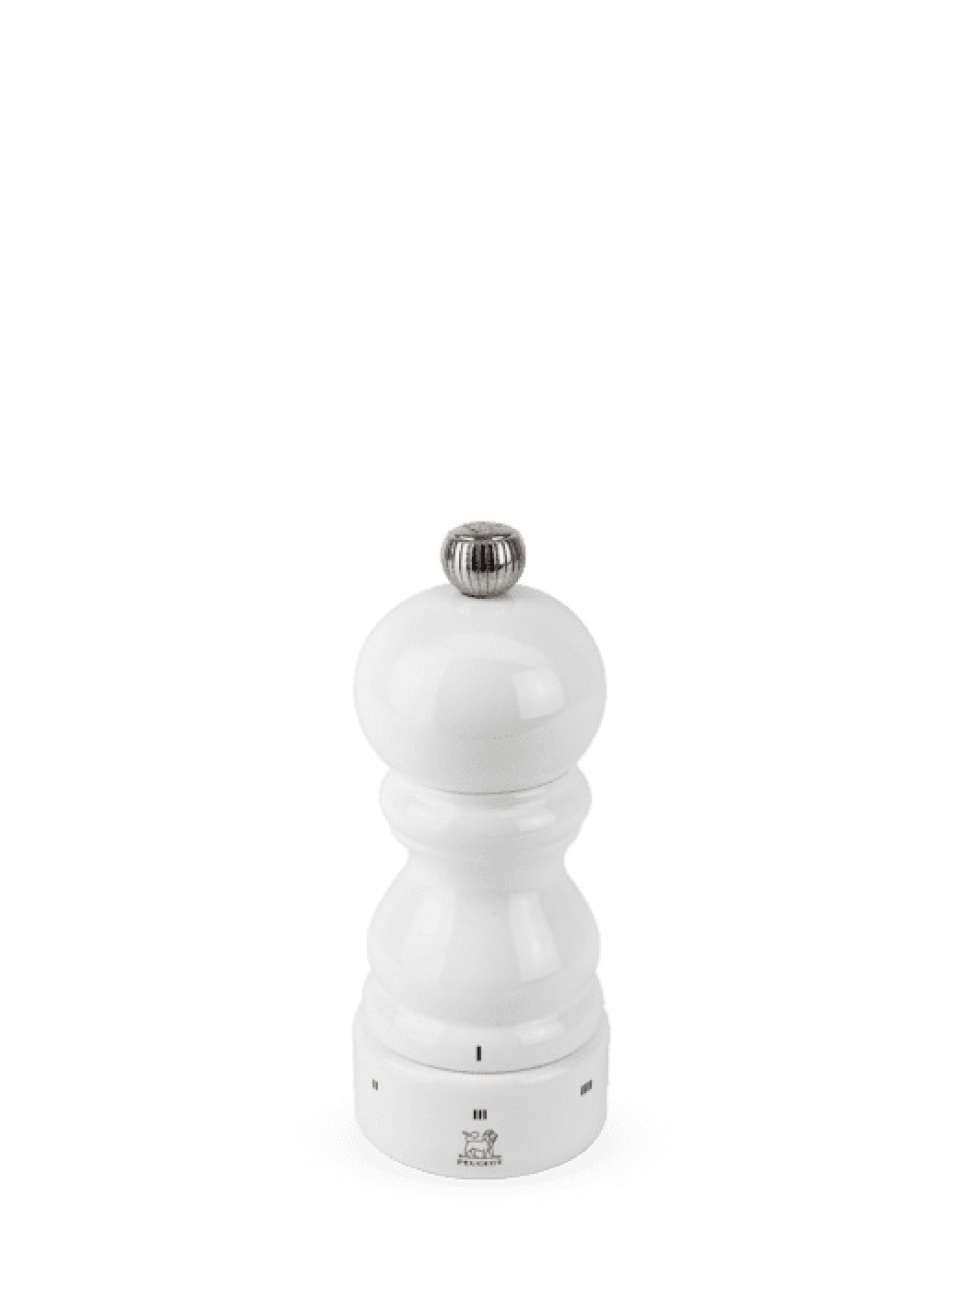 Paris Pepper mill 12 cm, U Select, White - Peugeot in the group Cooking / Kitchen utensils / Salt & pepper mills at KitchenLab (1090-13448)